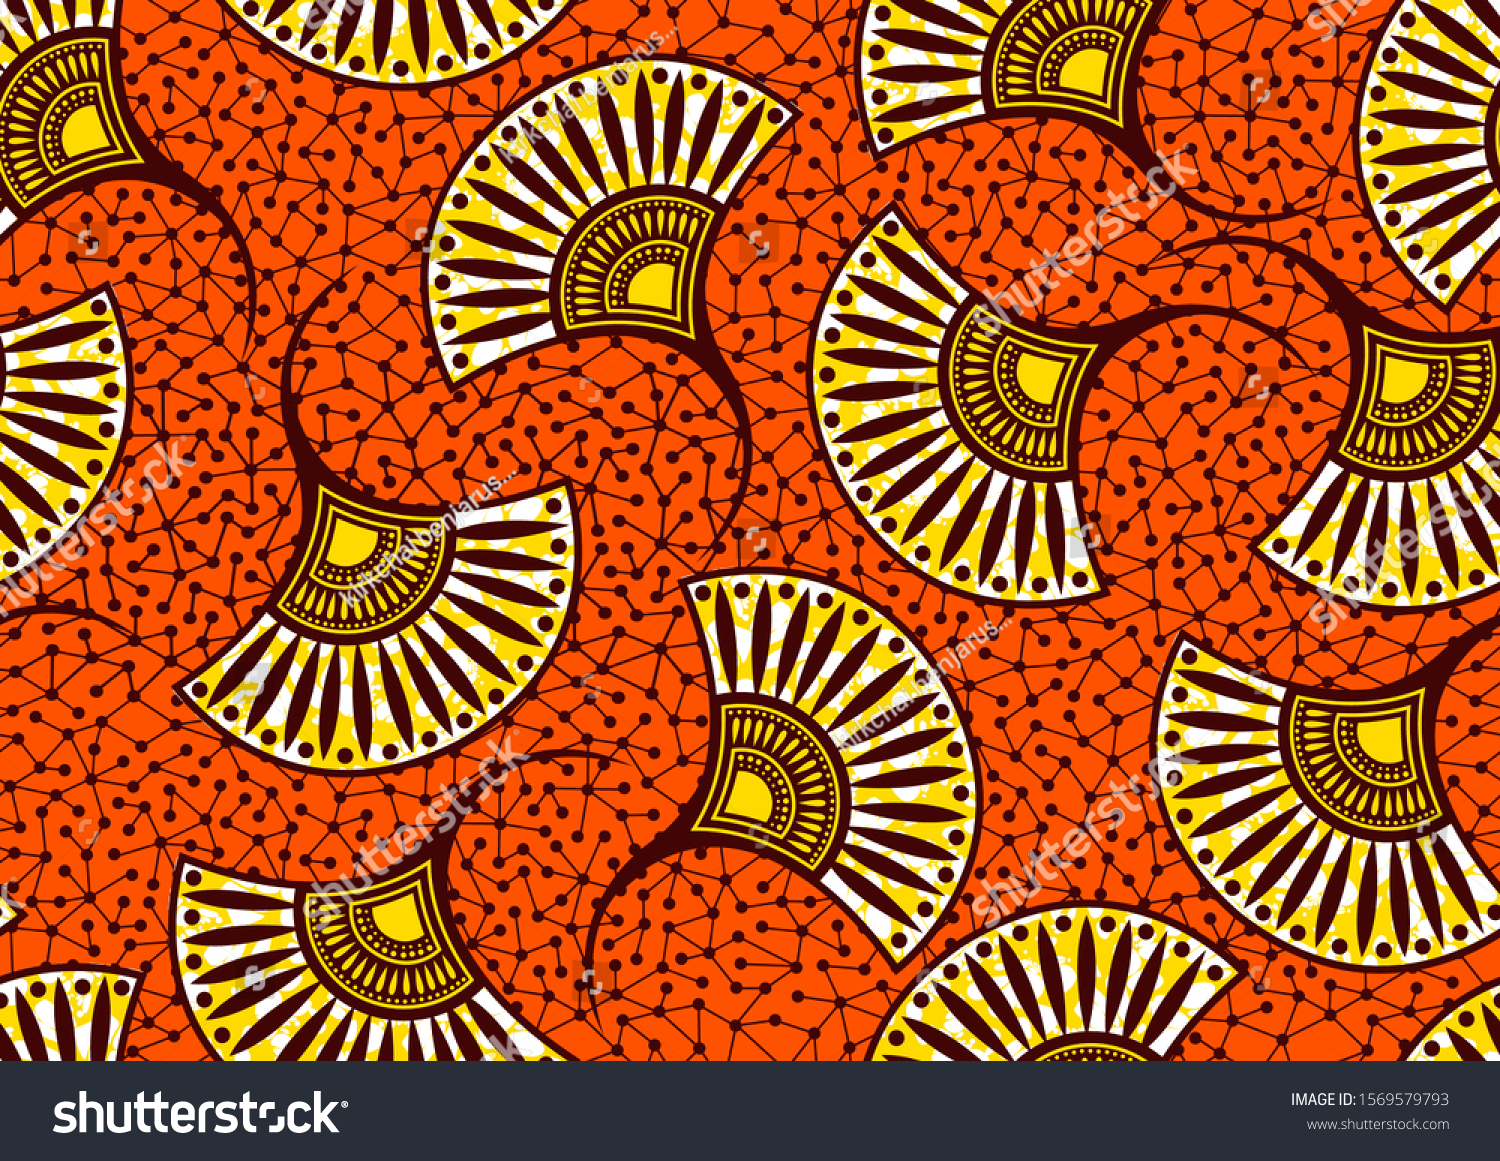 SVG of african fashion seamless pattern ornament in vibrant colours, picture art and abstract background for Fabric Print, Scarf, Shawl, Carpet, Kerchief, Handkerchief, vector illustration file EPS10.  svg